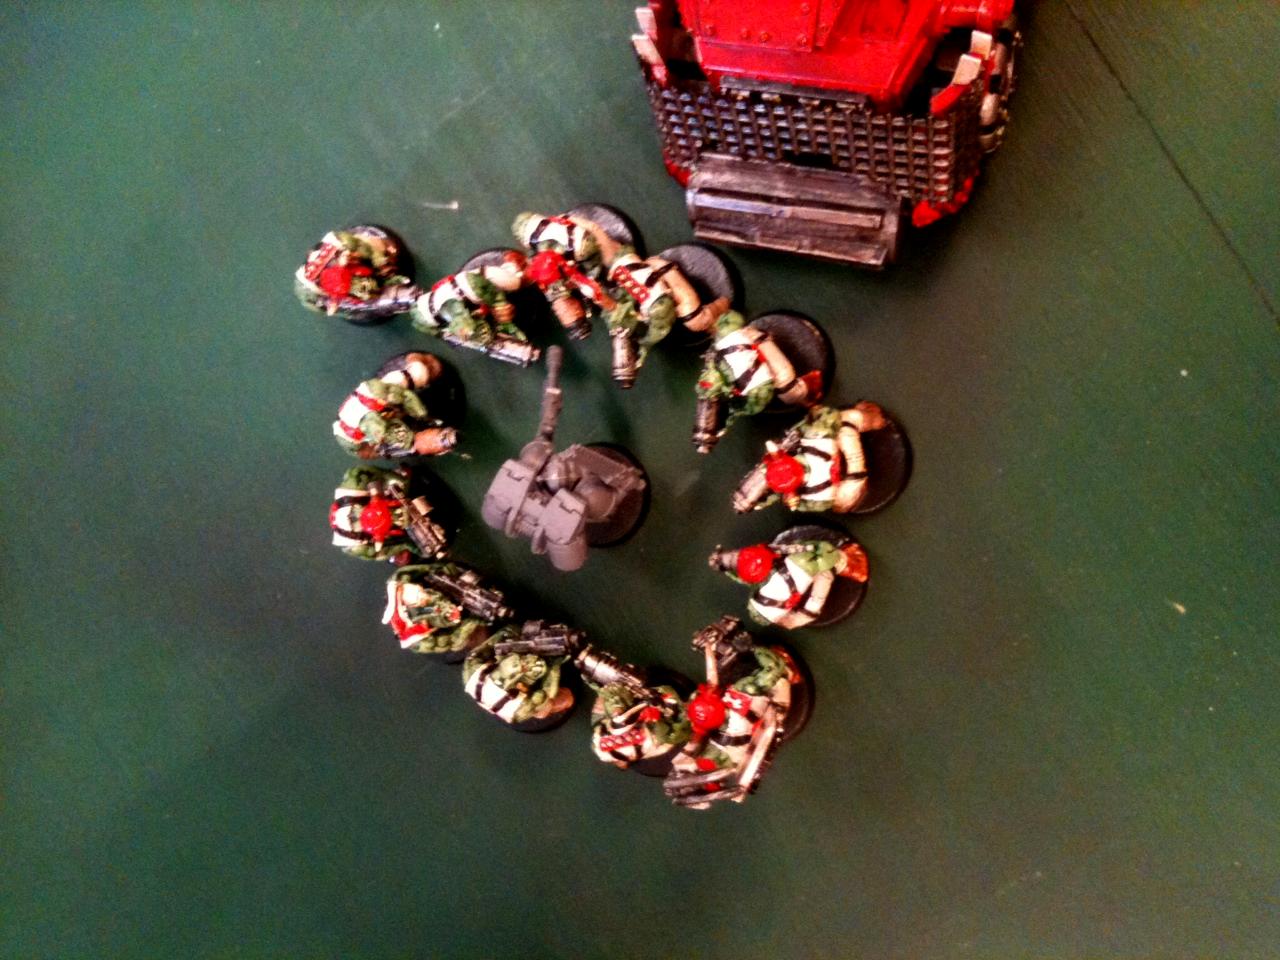 Battle Report, Orks, Space Marines, Surrounded